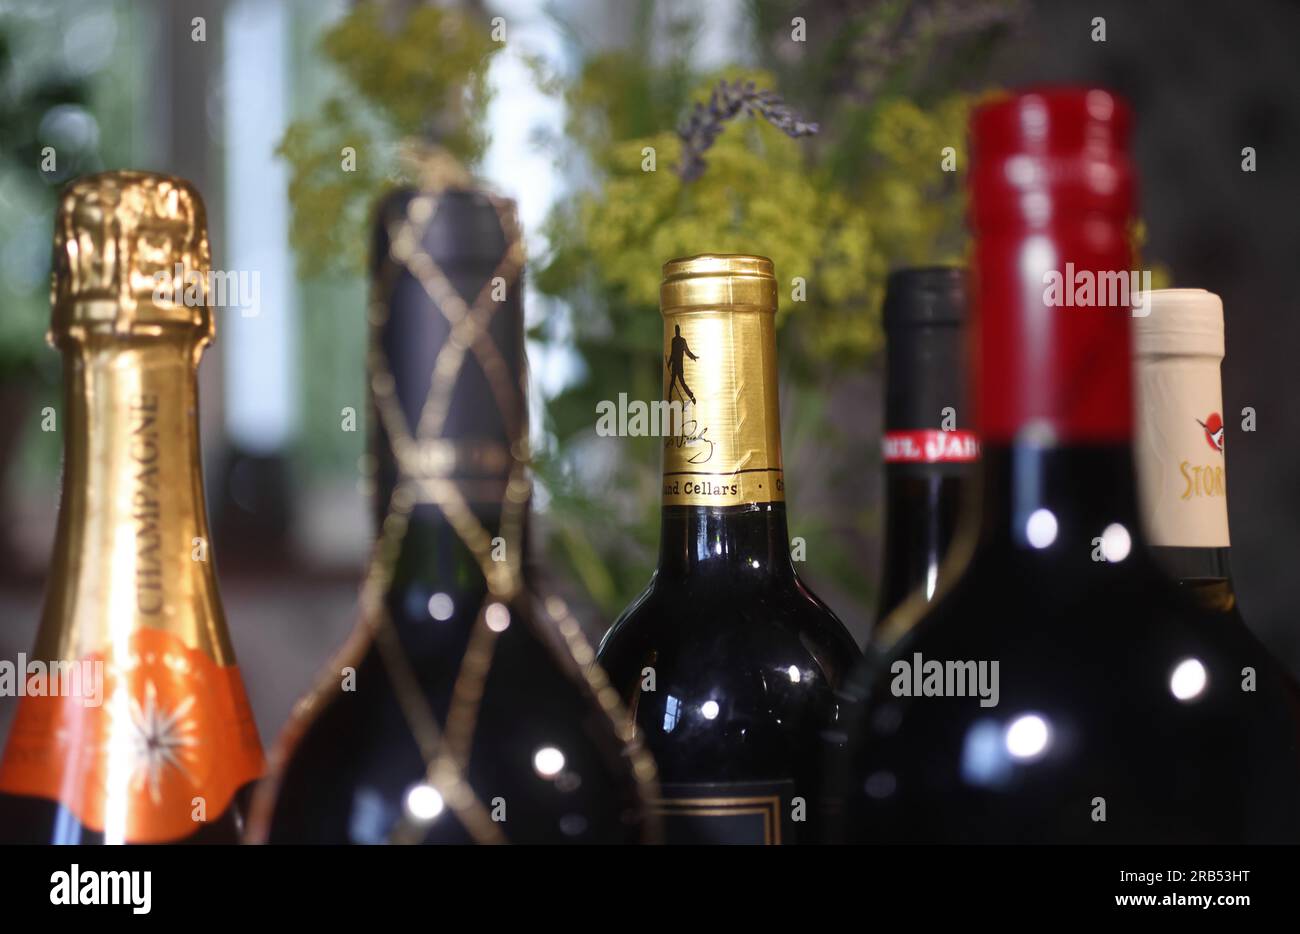 The Danish online wine retailer Winefinder may continue to sell and deliver wine to Swedish customers, the Supreme Court ruled today. The Supreme Court announced, on Friday, that the company's sale does not contravene Swedish alcohol law and upholds the Patent and Market Supreme Court's ruling. Stock Photo